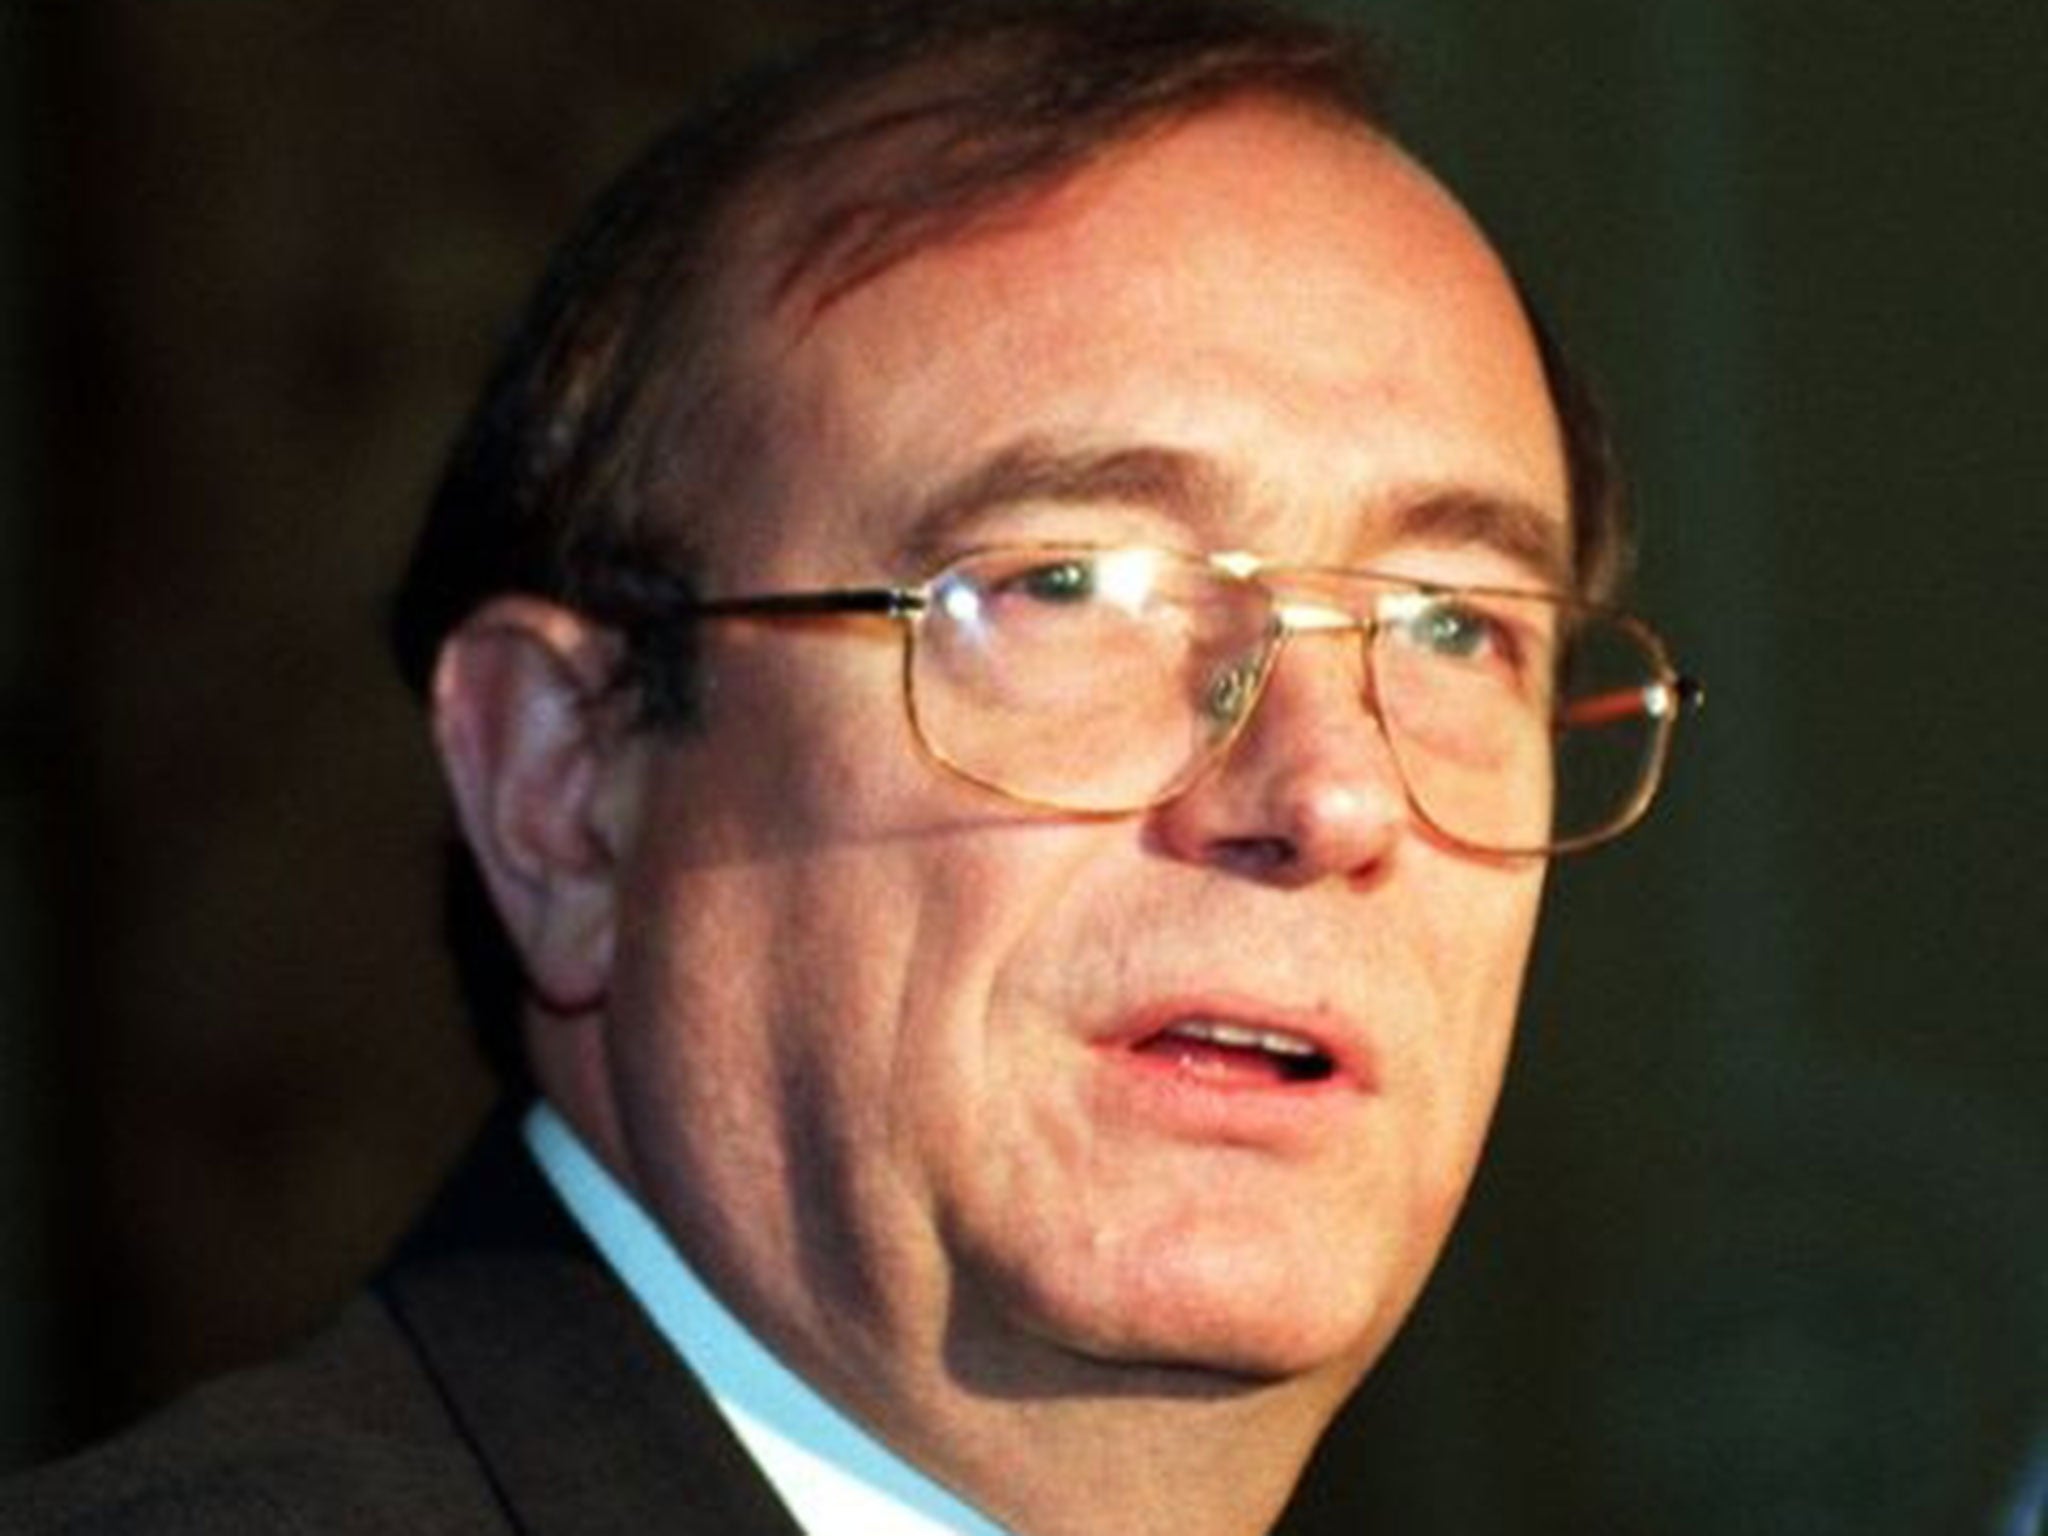 Lord Sewel, who has resigned as Lords Deputy Speaker after The Sun on Sunday published video of him allegedly taking drugs with prostitutes, sources at the House of Lords said.